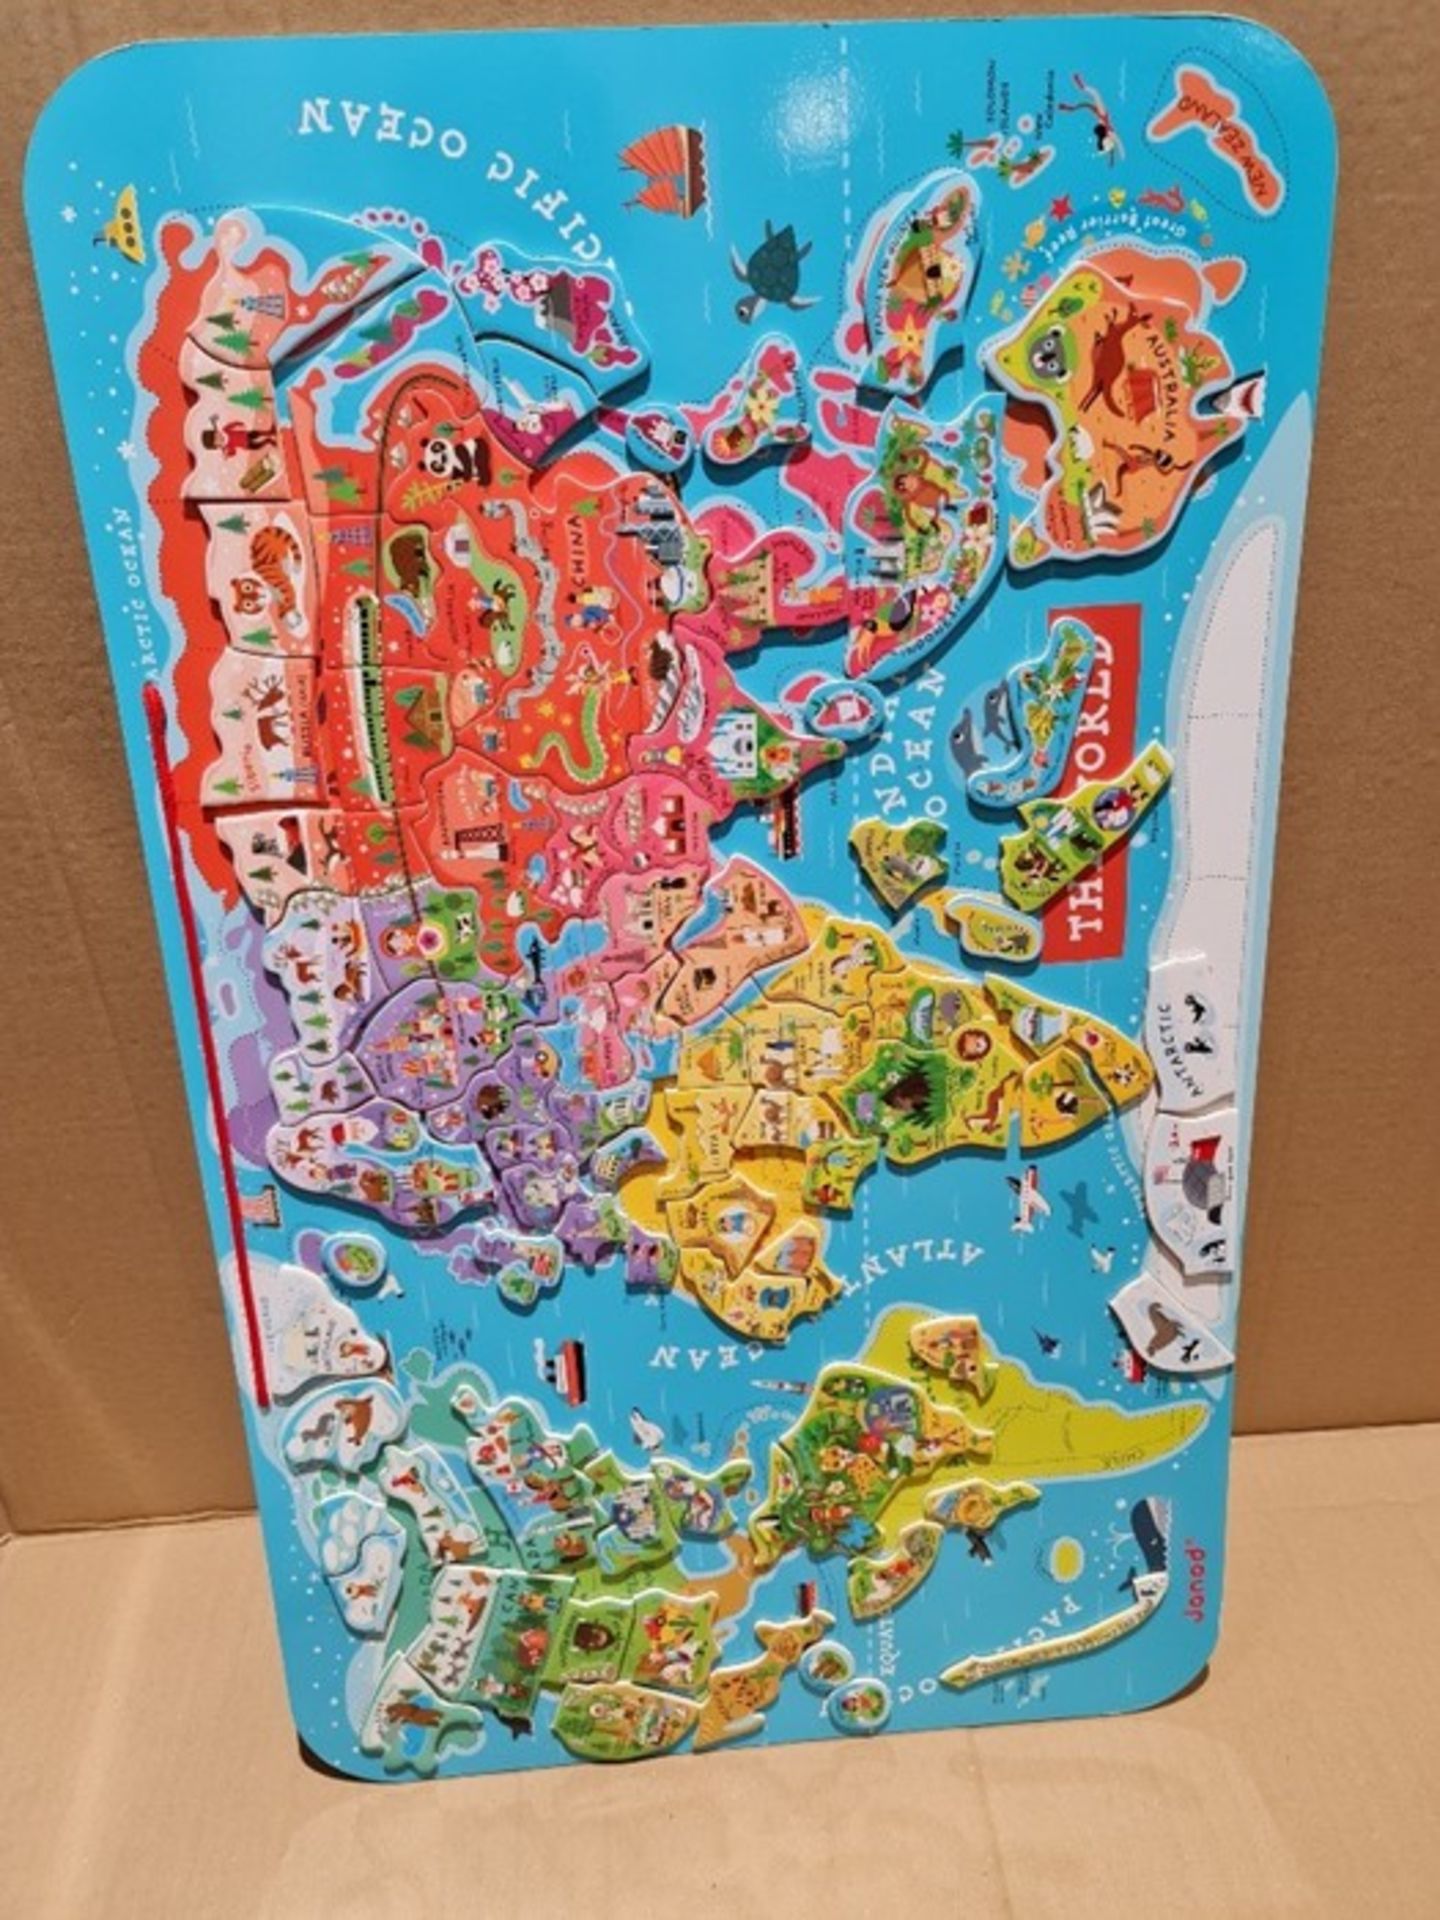 Janod Wooden Magnetic World Map Puzzle - 92 Magnetic Pieces - 70 x 43 cm - English Ver - Image 2 of 2